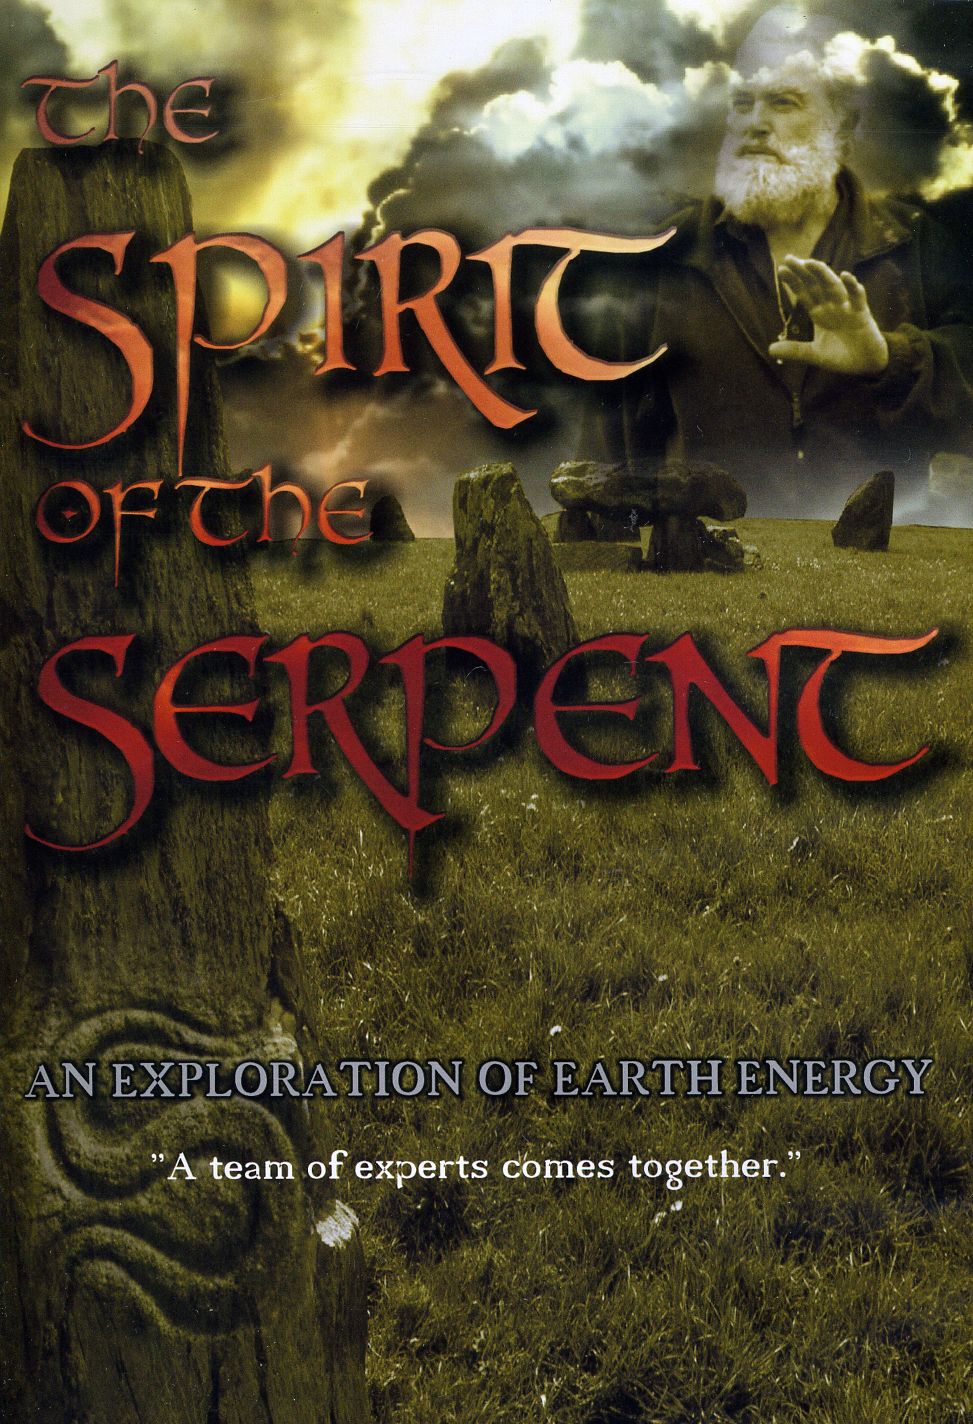 SPIRIT OF THE SERPENT: EXPLORATION OF EARTH ENERGY